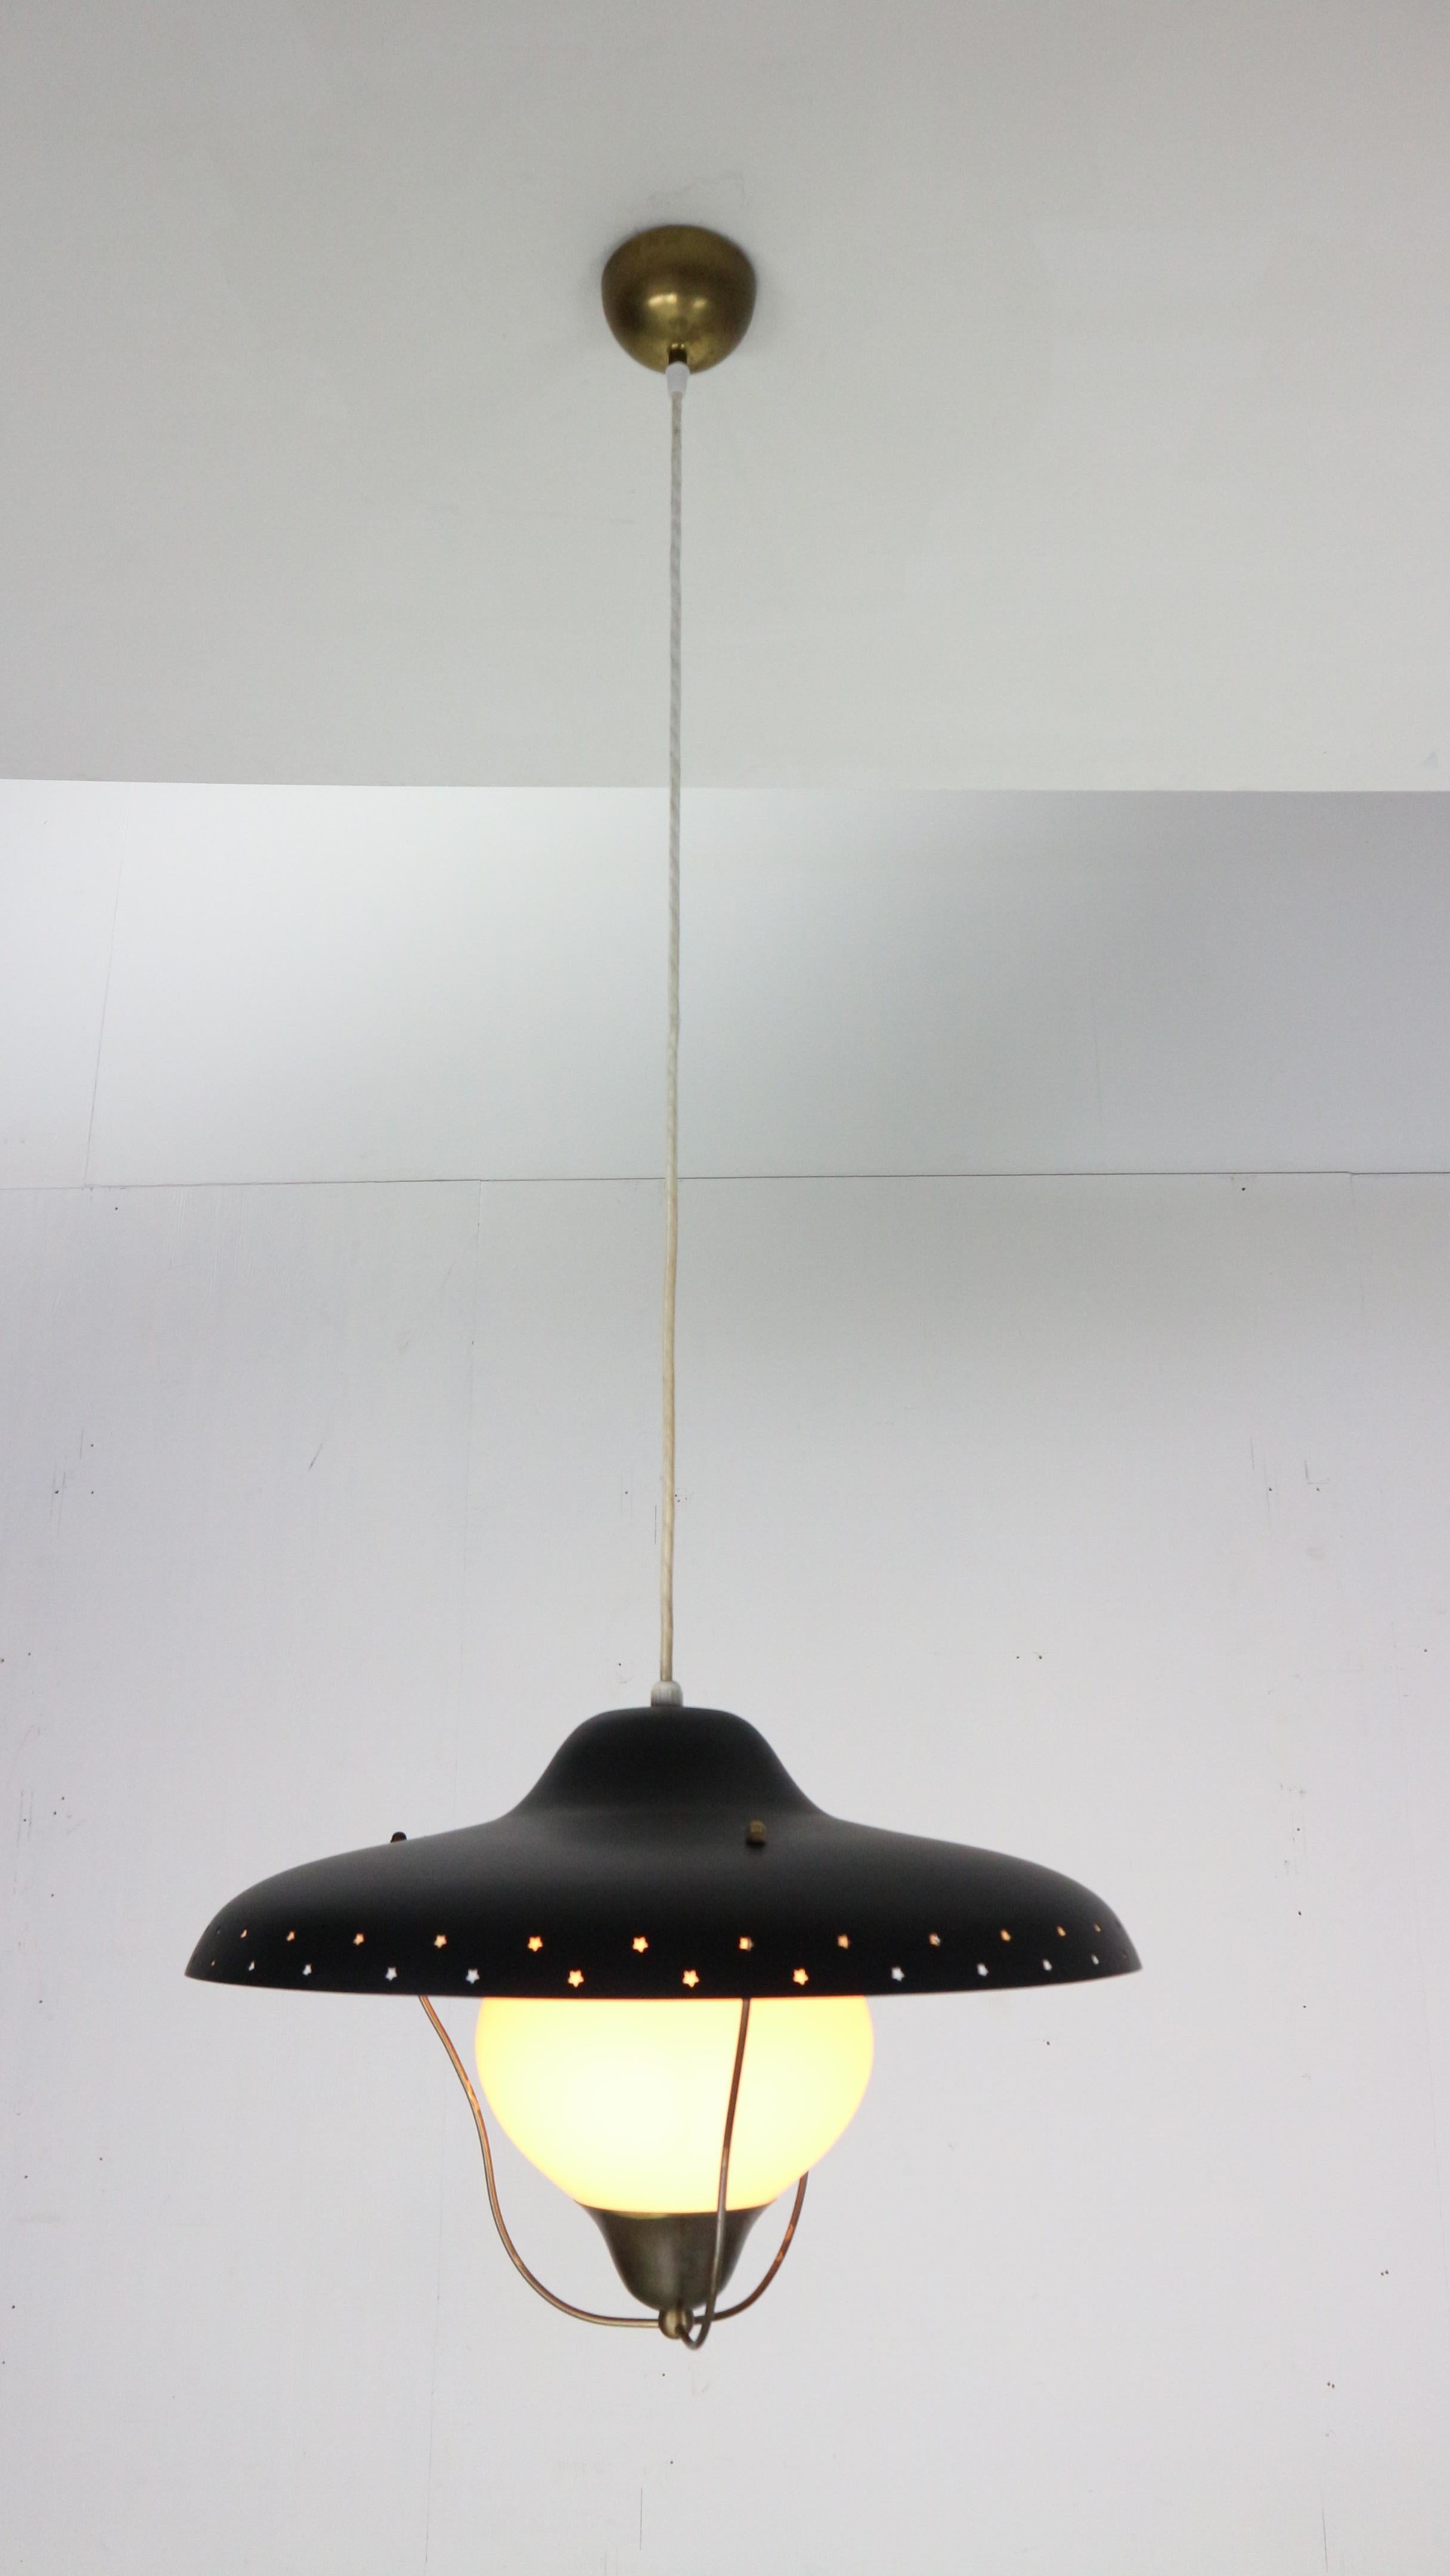 A brass, black-lacquered and opaline glass pendant designed by Bent Karlby and produced by Lyfa, Denmark, 1950s. The shade shows perforated stars and the glass is held by a brass base.
The lamp is 25x45cm and adjustable in height